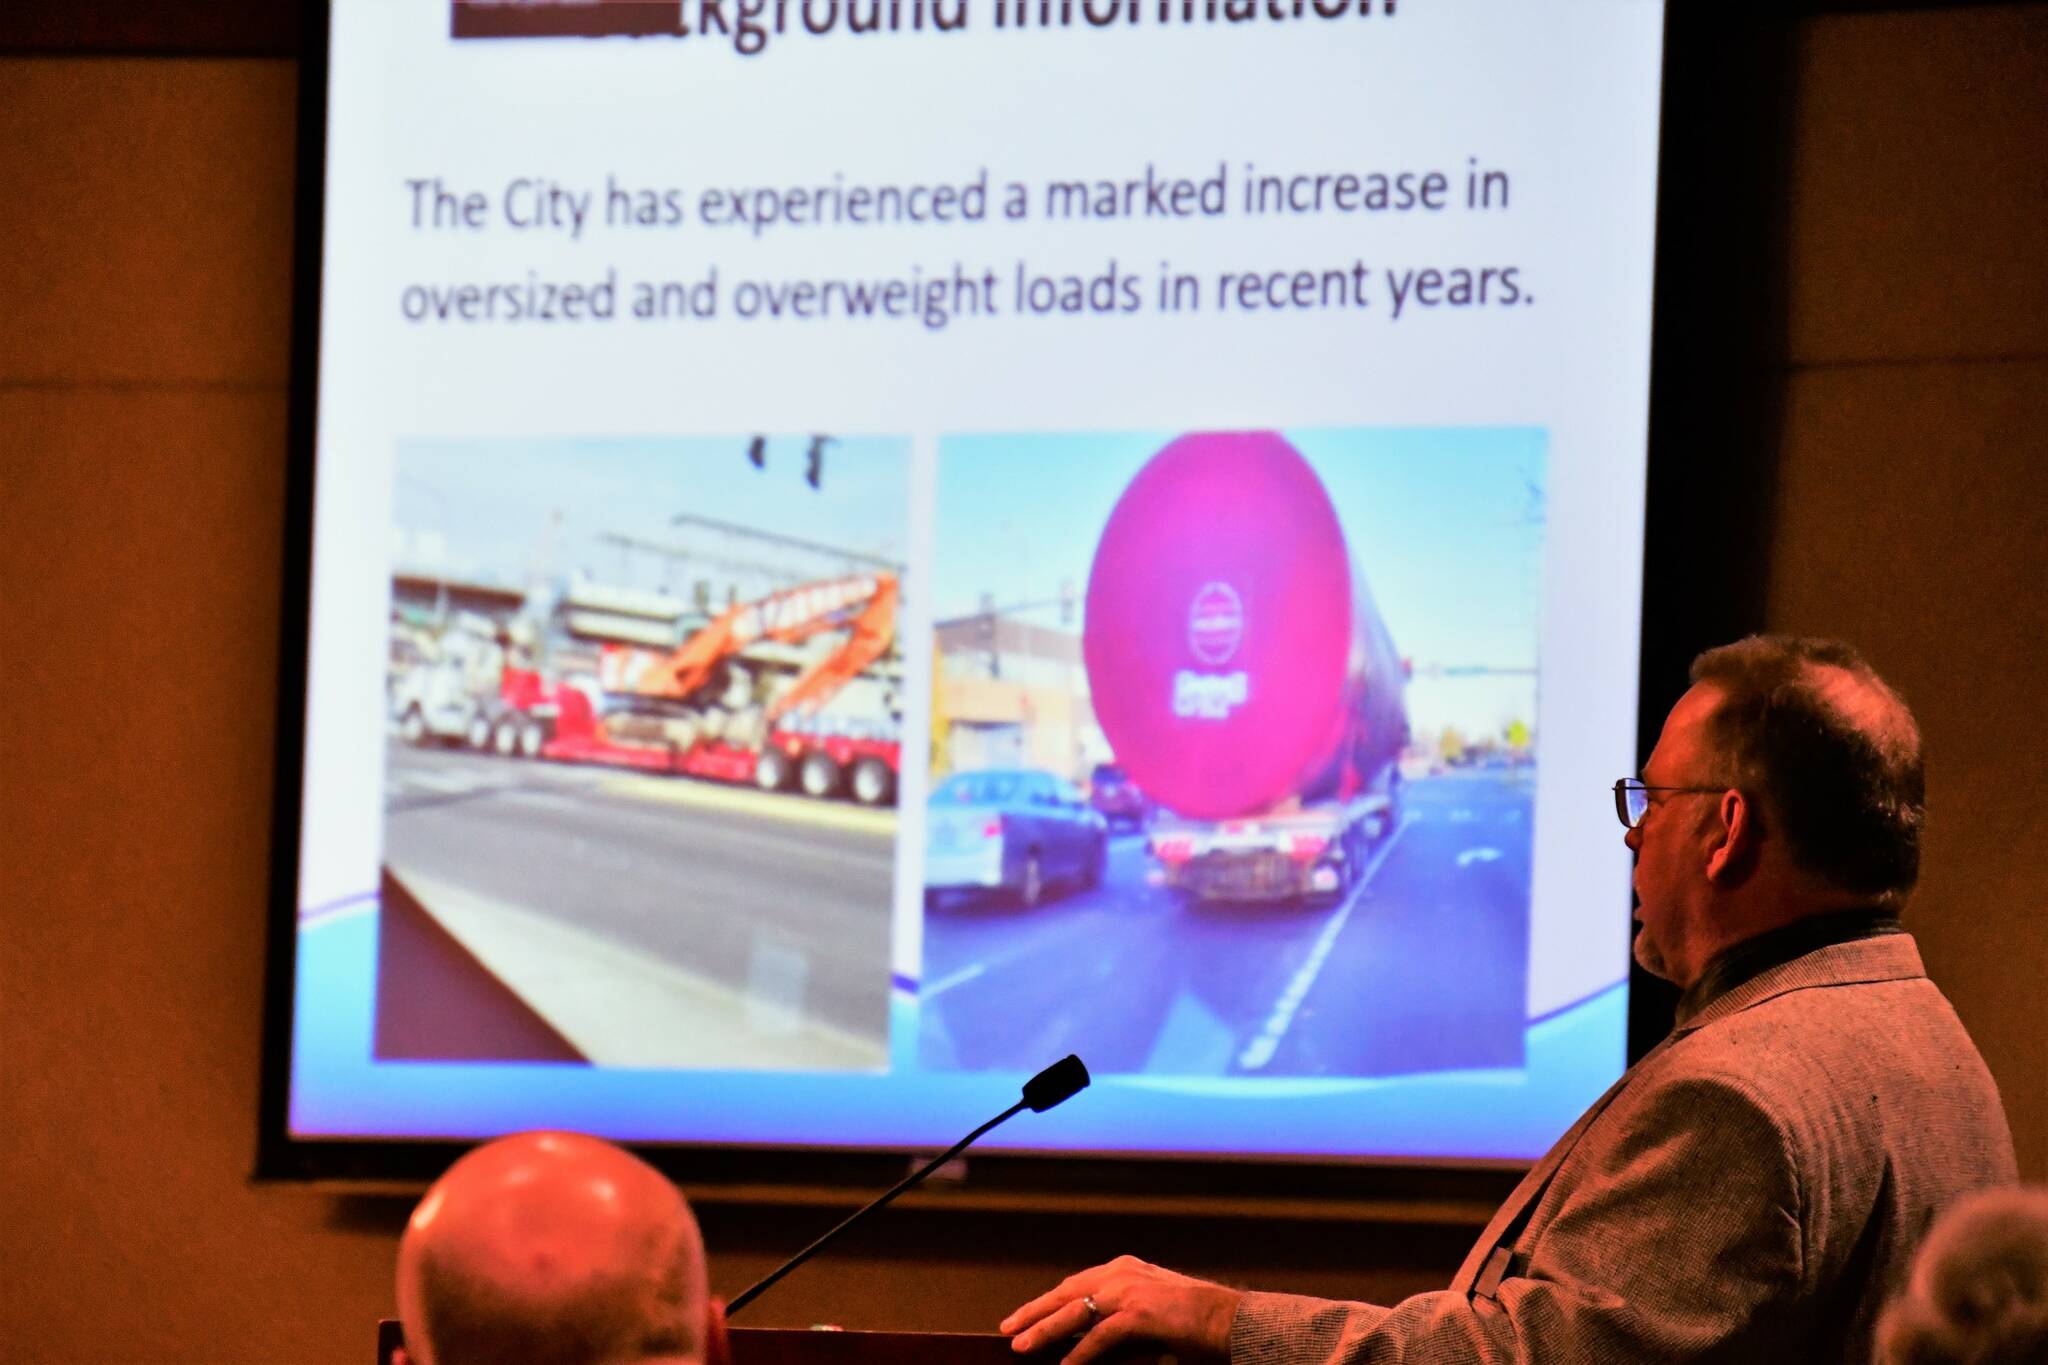 Public Works Development Services Manager Cole Elliott gives a presentation on the increase of oversize- and overweight-loaded vehicles in Federal Way in recent years, many of those vehicles travelling on non-designated truck routes which increases wear-and-tear of city infrastructure. An ordinance in the works would seek to work cooperatively with haulers to minimize that damage. Photo by Bruce Honda